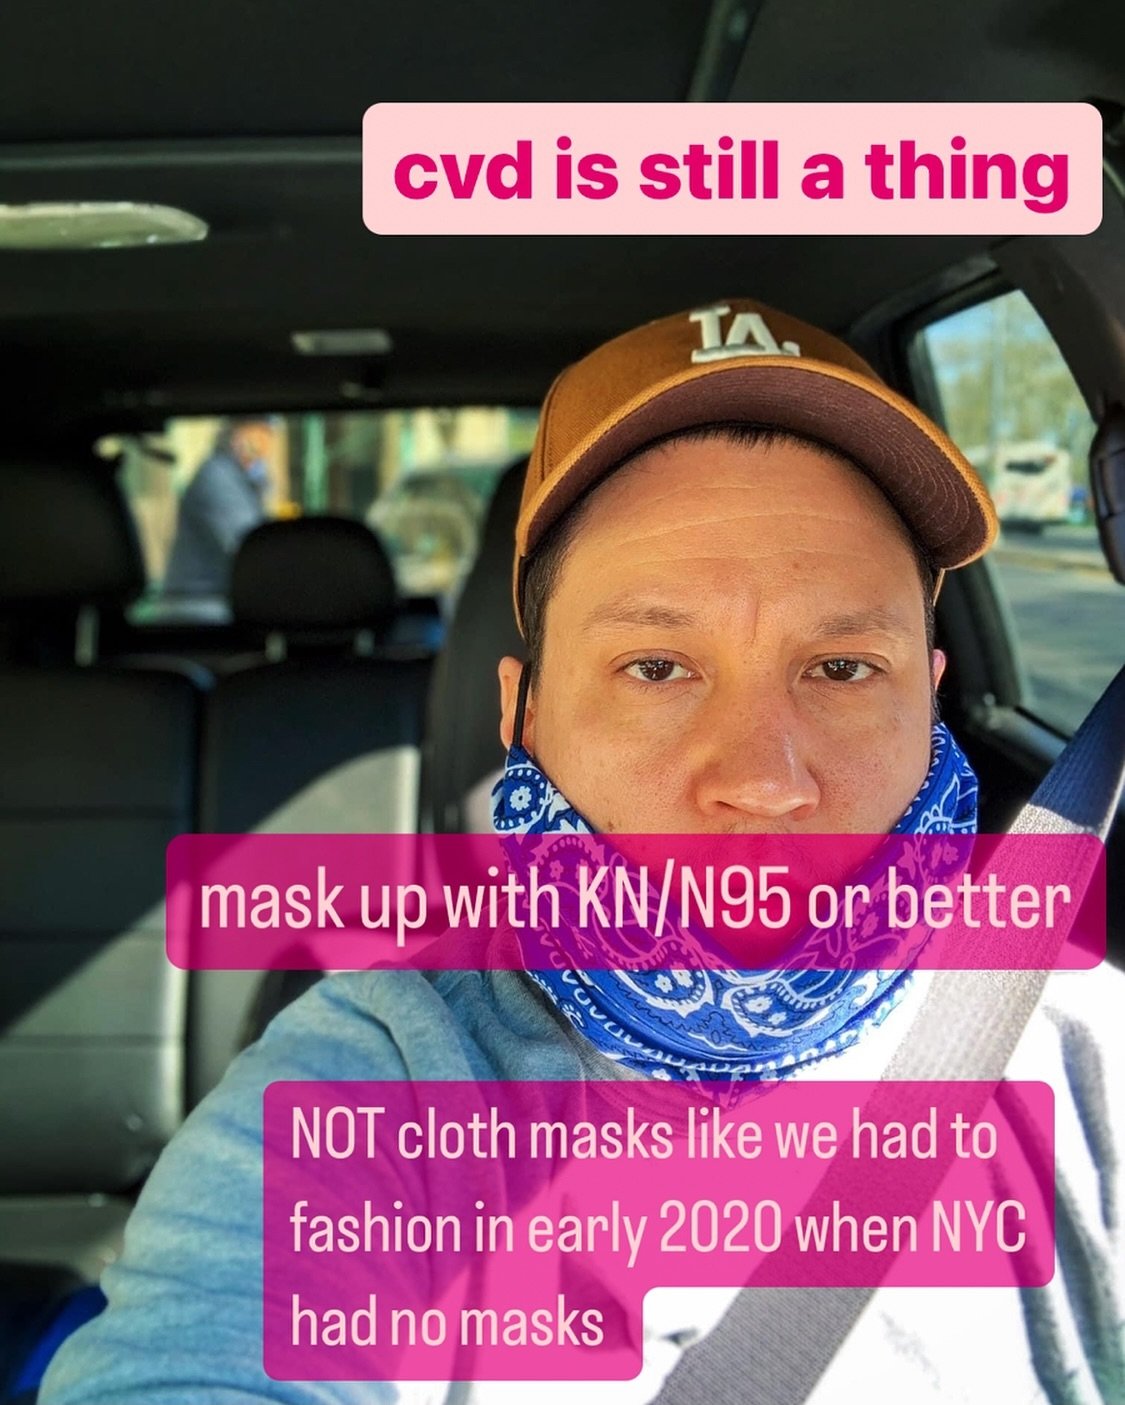 cvd is still a thing 

mask up with KN/N95 or better 

NOT cloth masks like we had to fashion in early 2020 when NYC had no masks 

#covidisntover #maskup #wearamask #mask